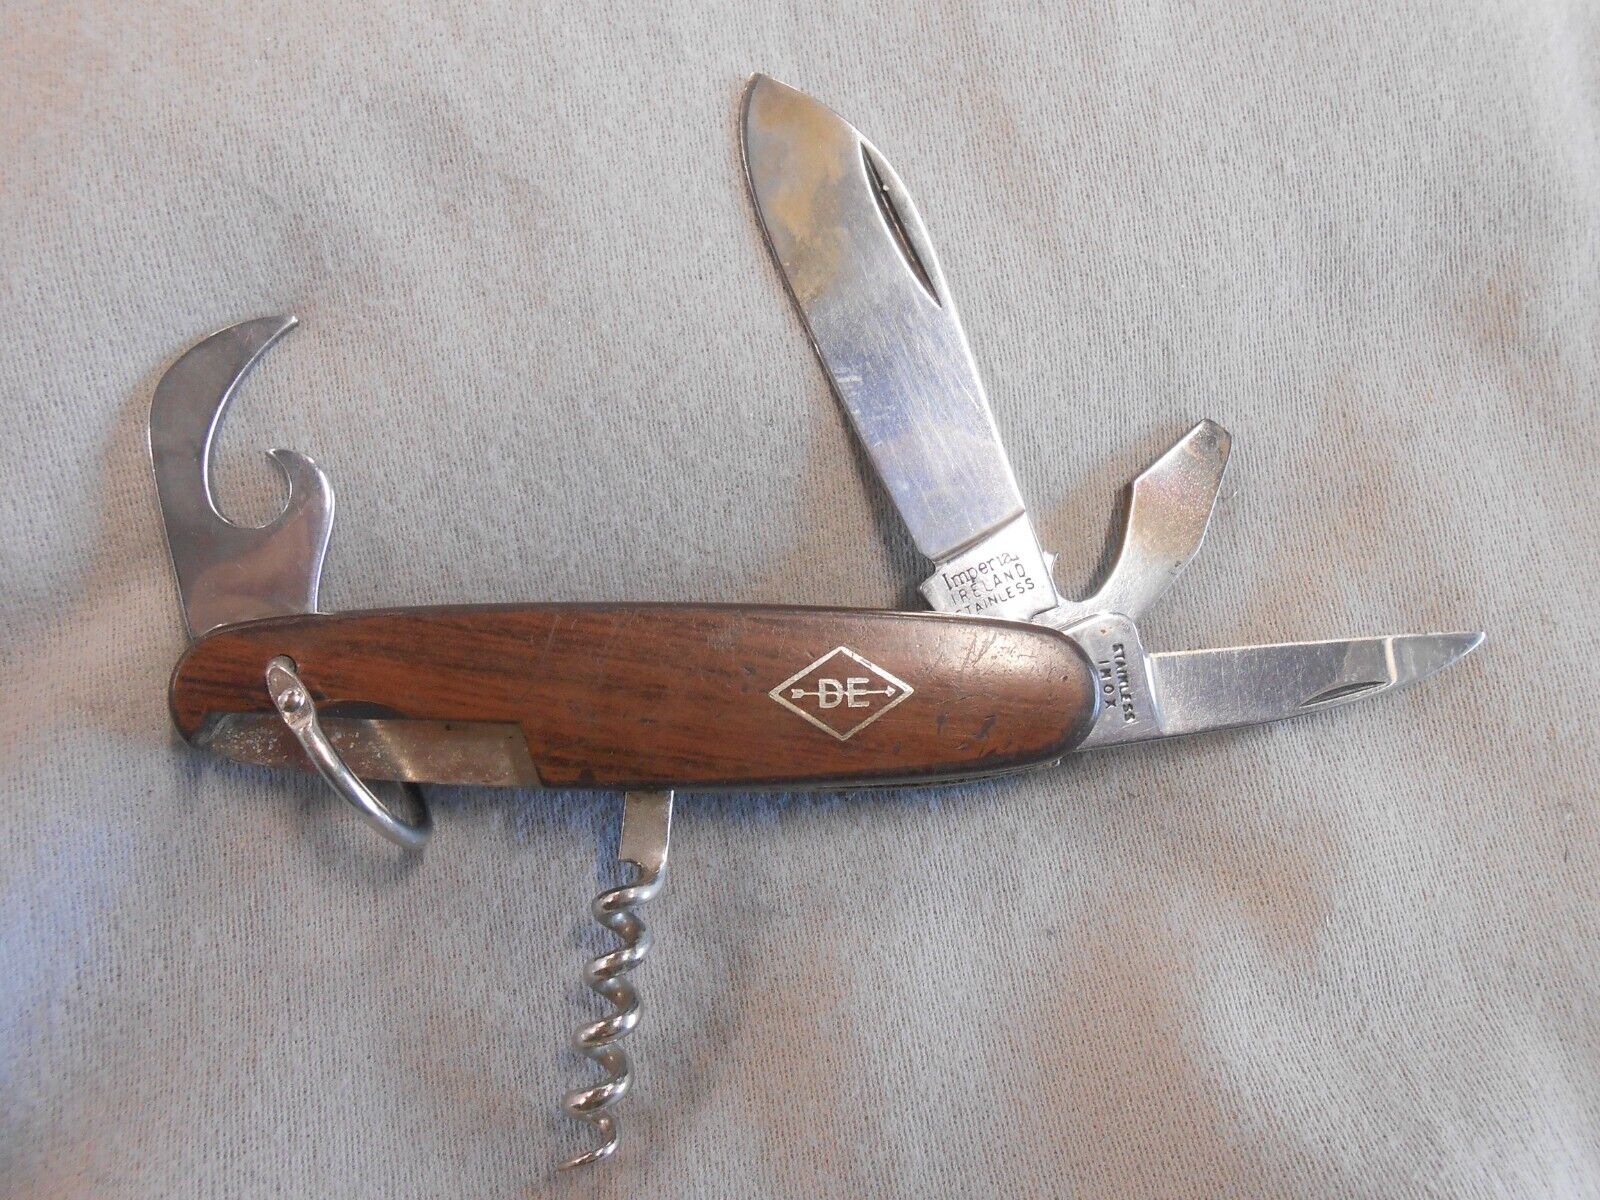 VINTAGE IMPERIAL IRELAND DE STAINLESS CAMP UTILITY OR SCOUT KNIFE WITH CORKSCREW